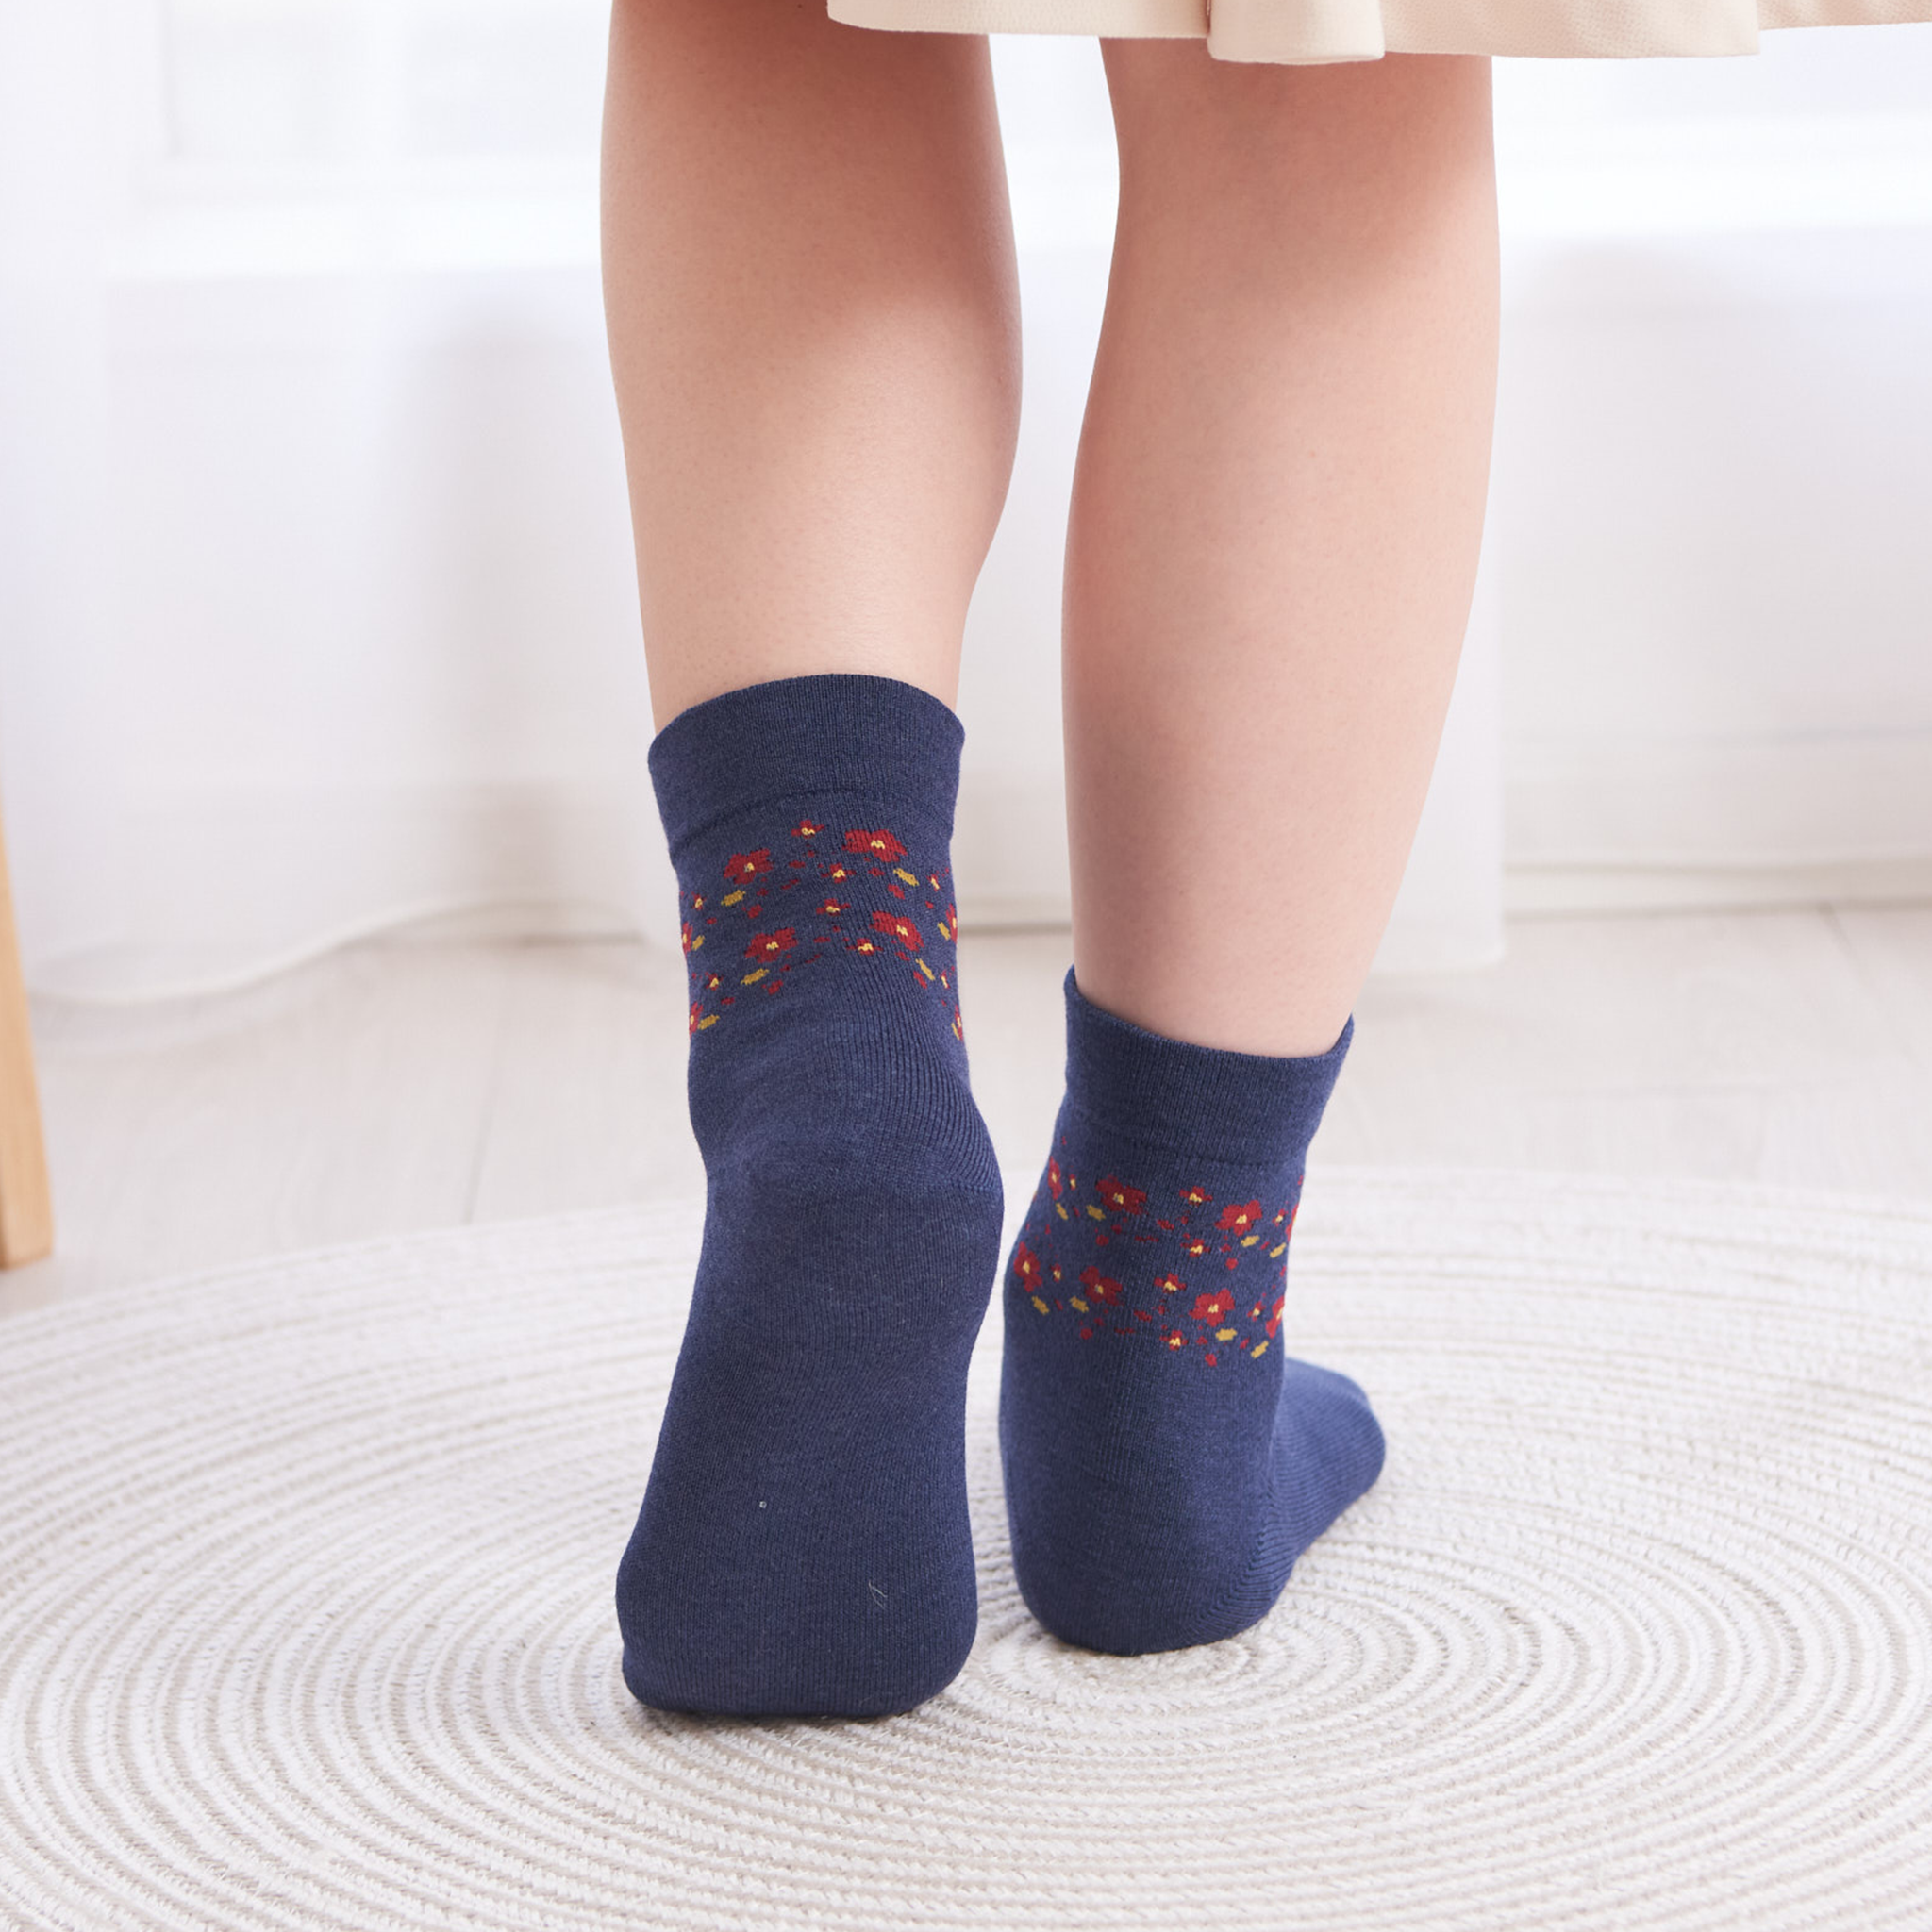 Smooth-heel socks double-layer wool blend [Flowers around ankle] - 663